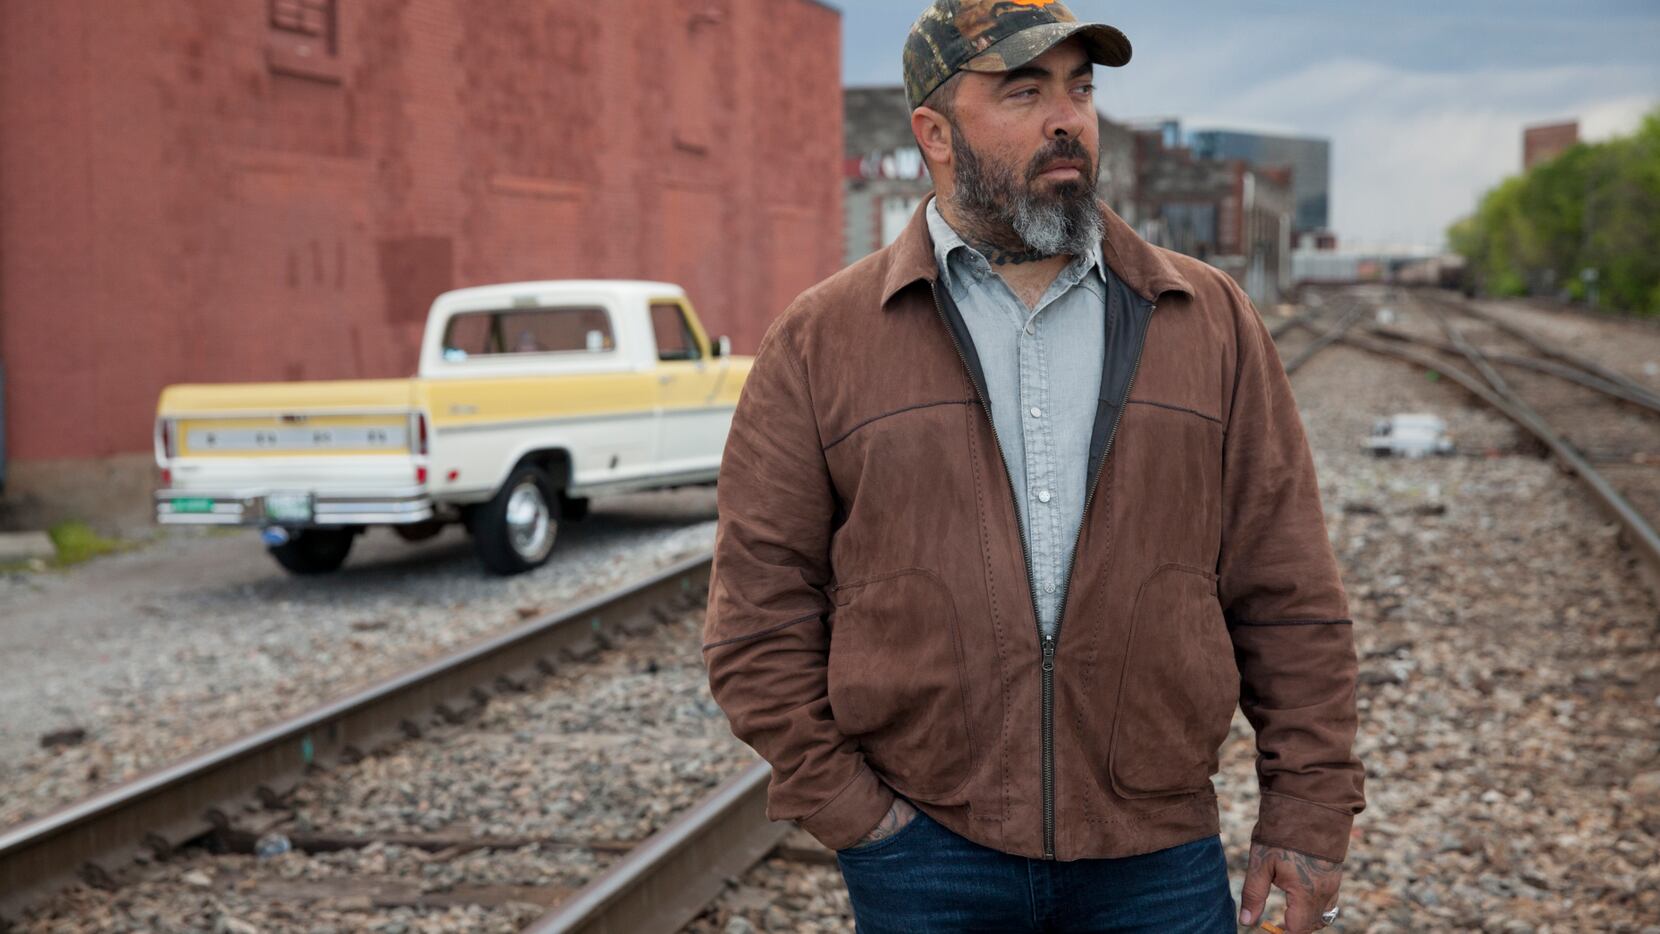 Aaron Lewis, frontman for the hard rock band Staind, released country album 'Sinner,'...